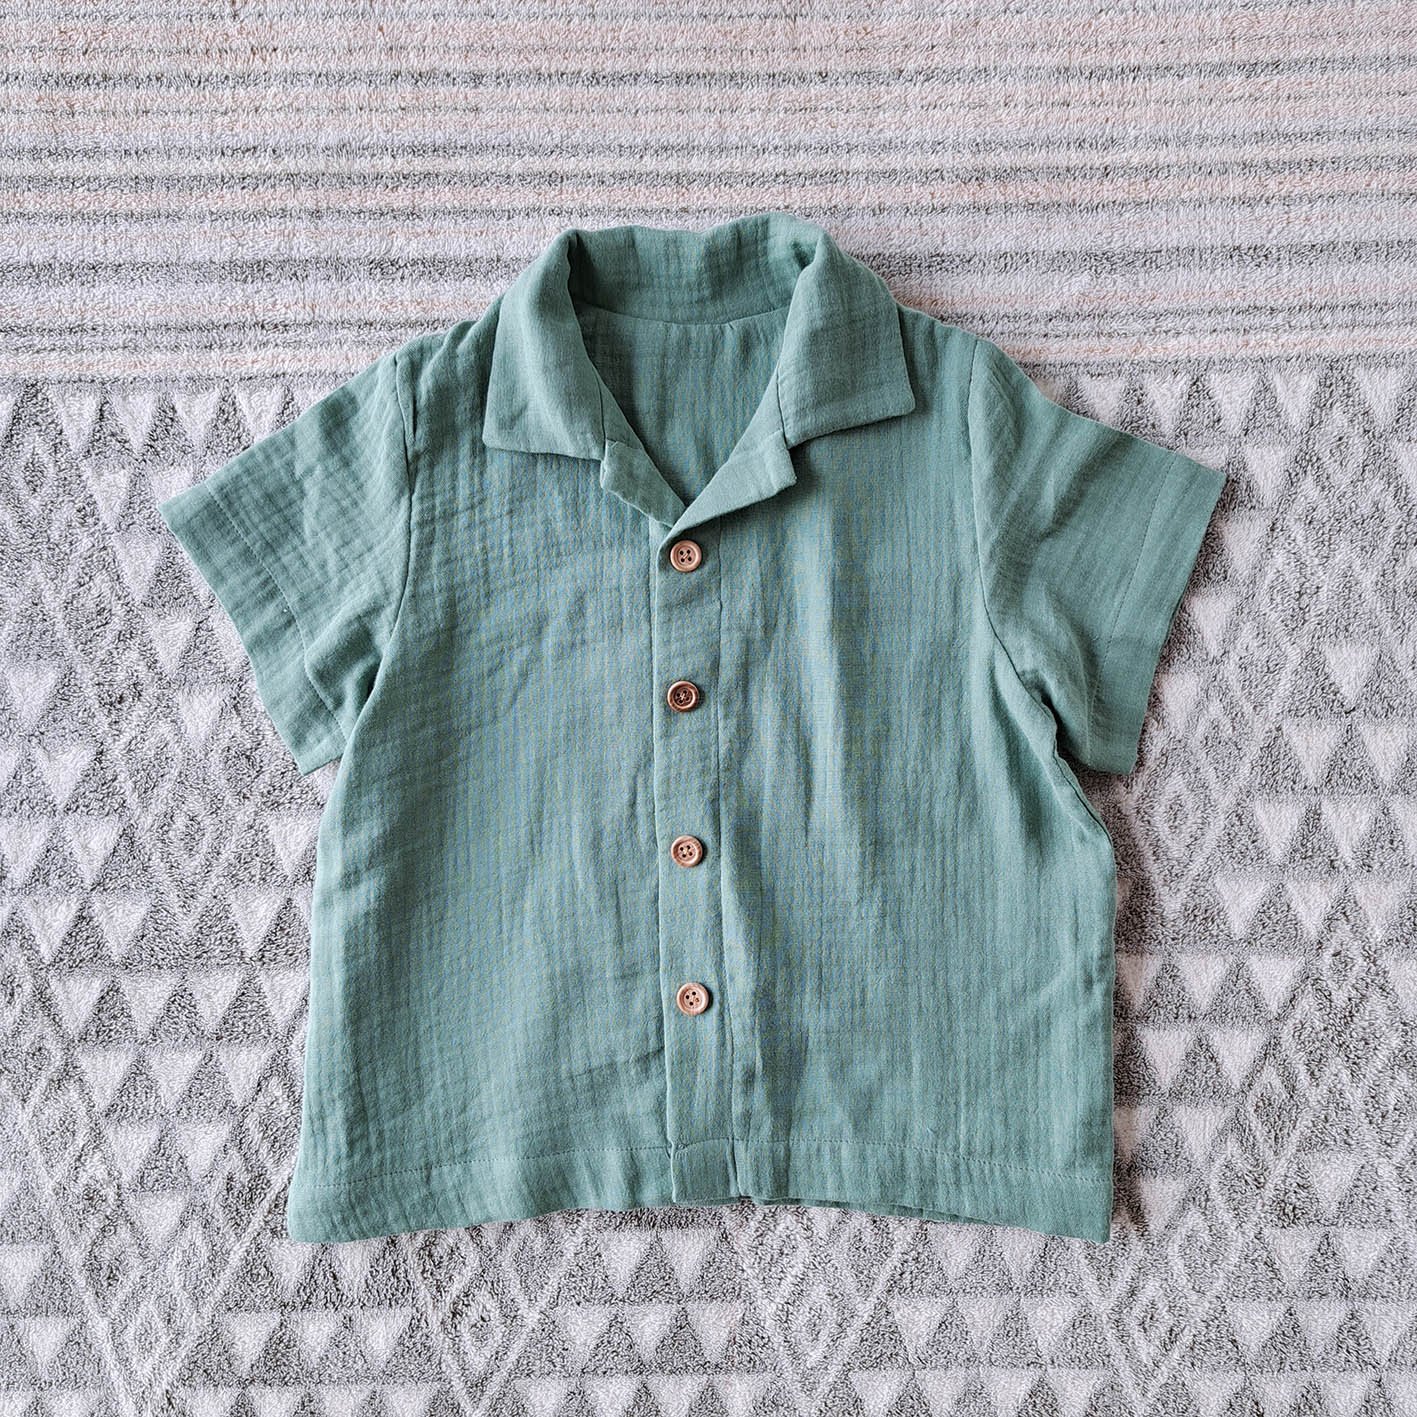 BOYS & GIRLS TEAL GREEN SHIRTS / 100% COTTON CRINKLED